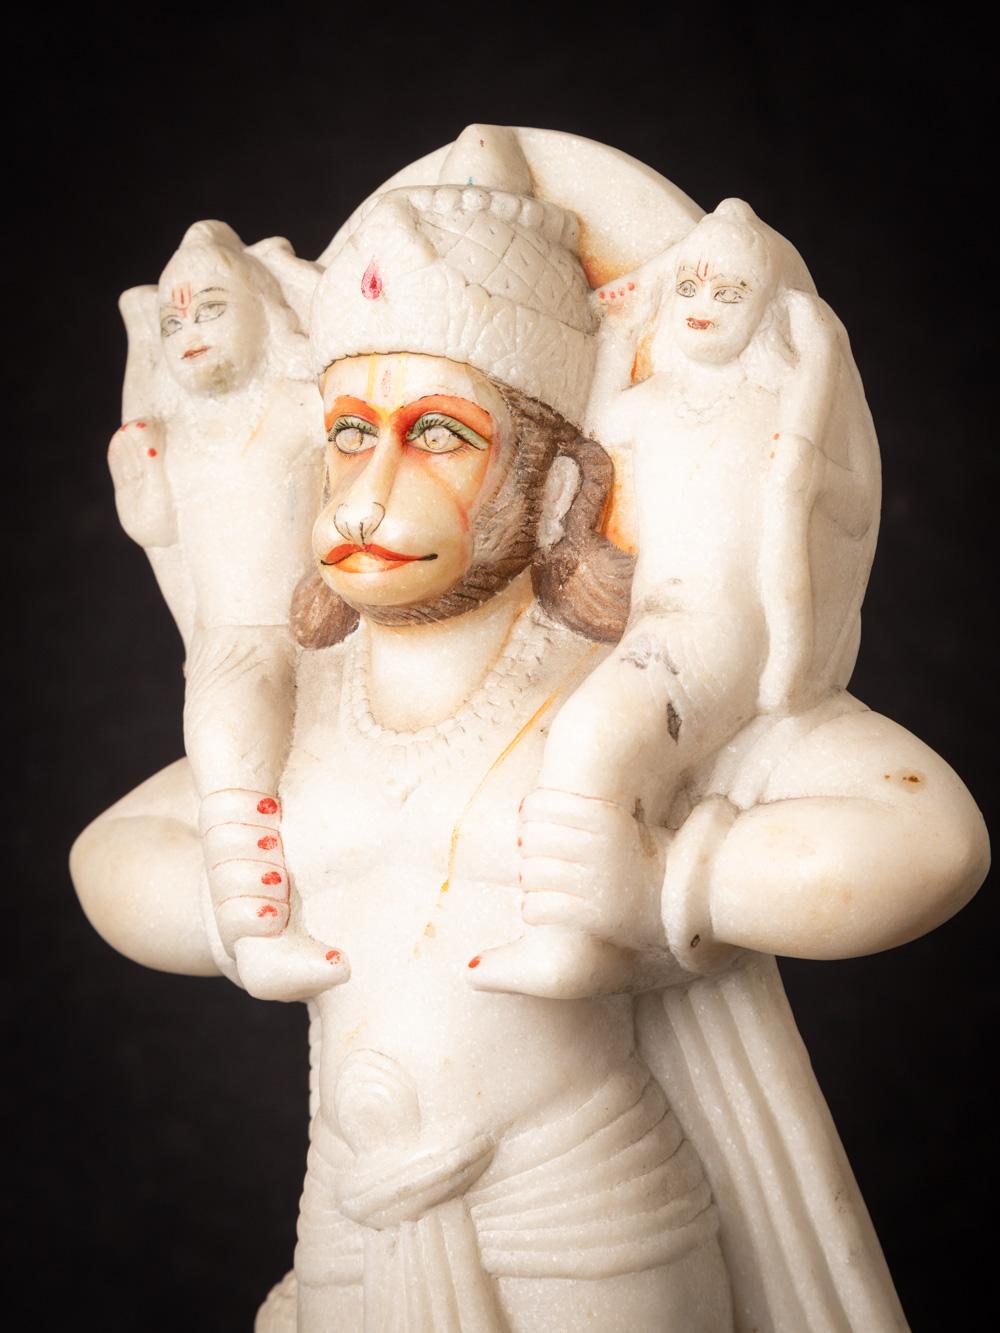 Middle 20th century old marble Hanuman statue from India - Original Buddhas For Sale 3